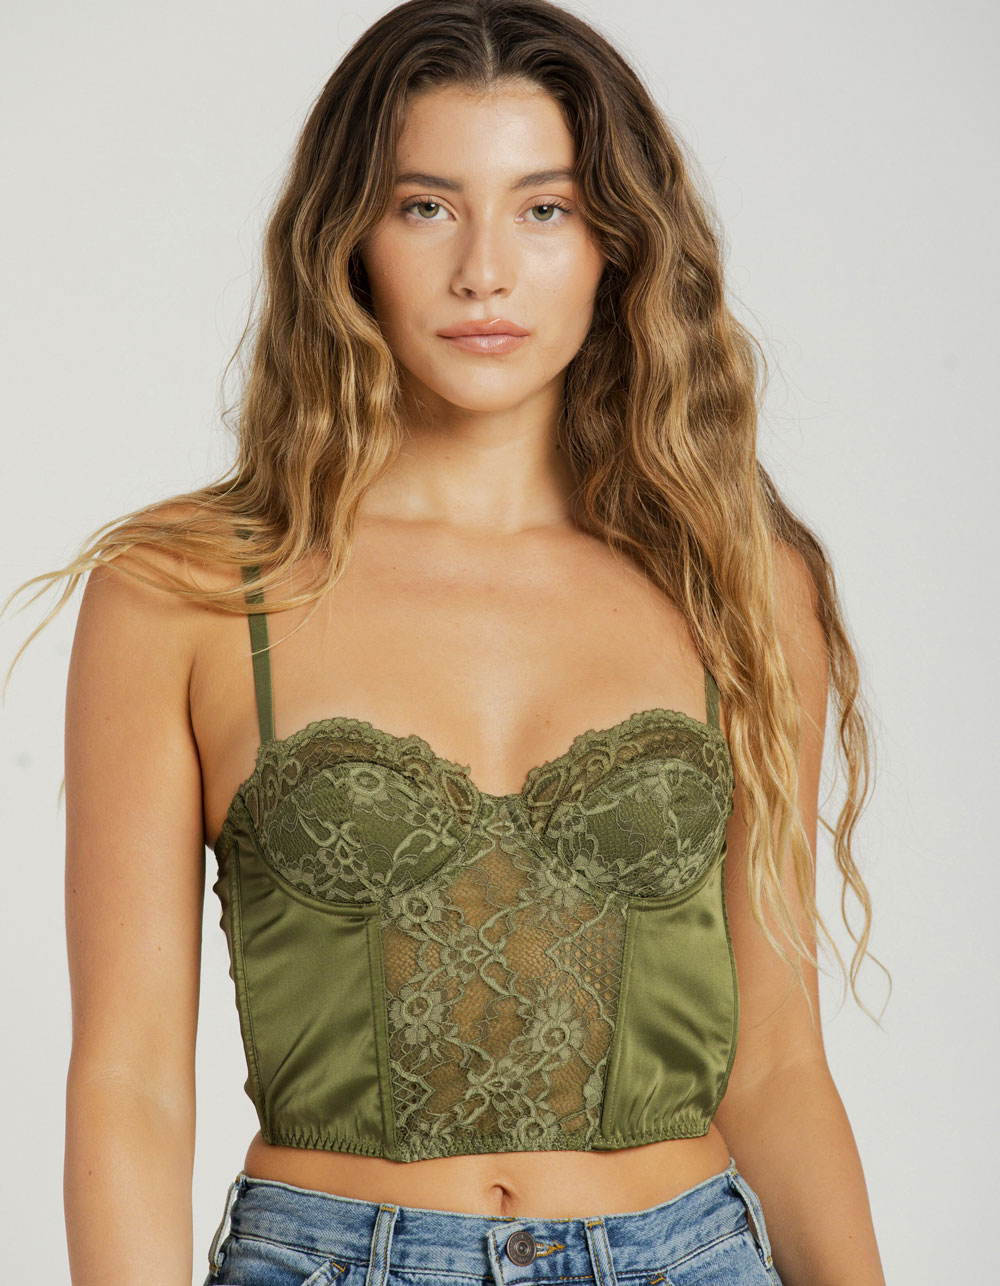 Lace Corset Top in Green